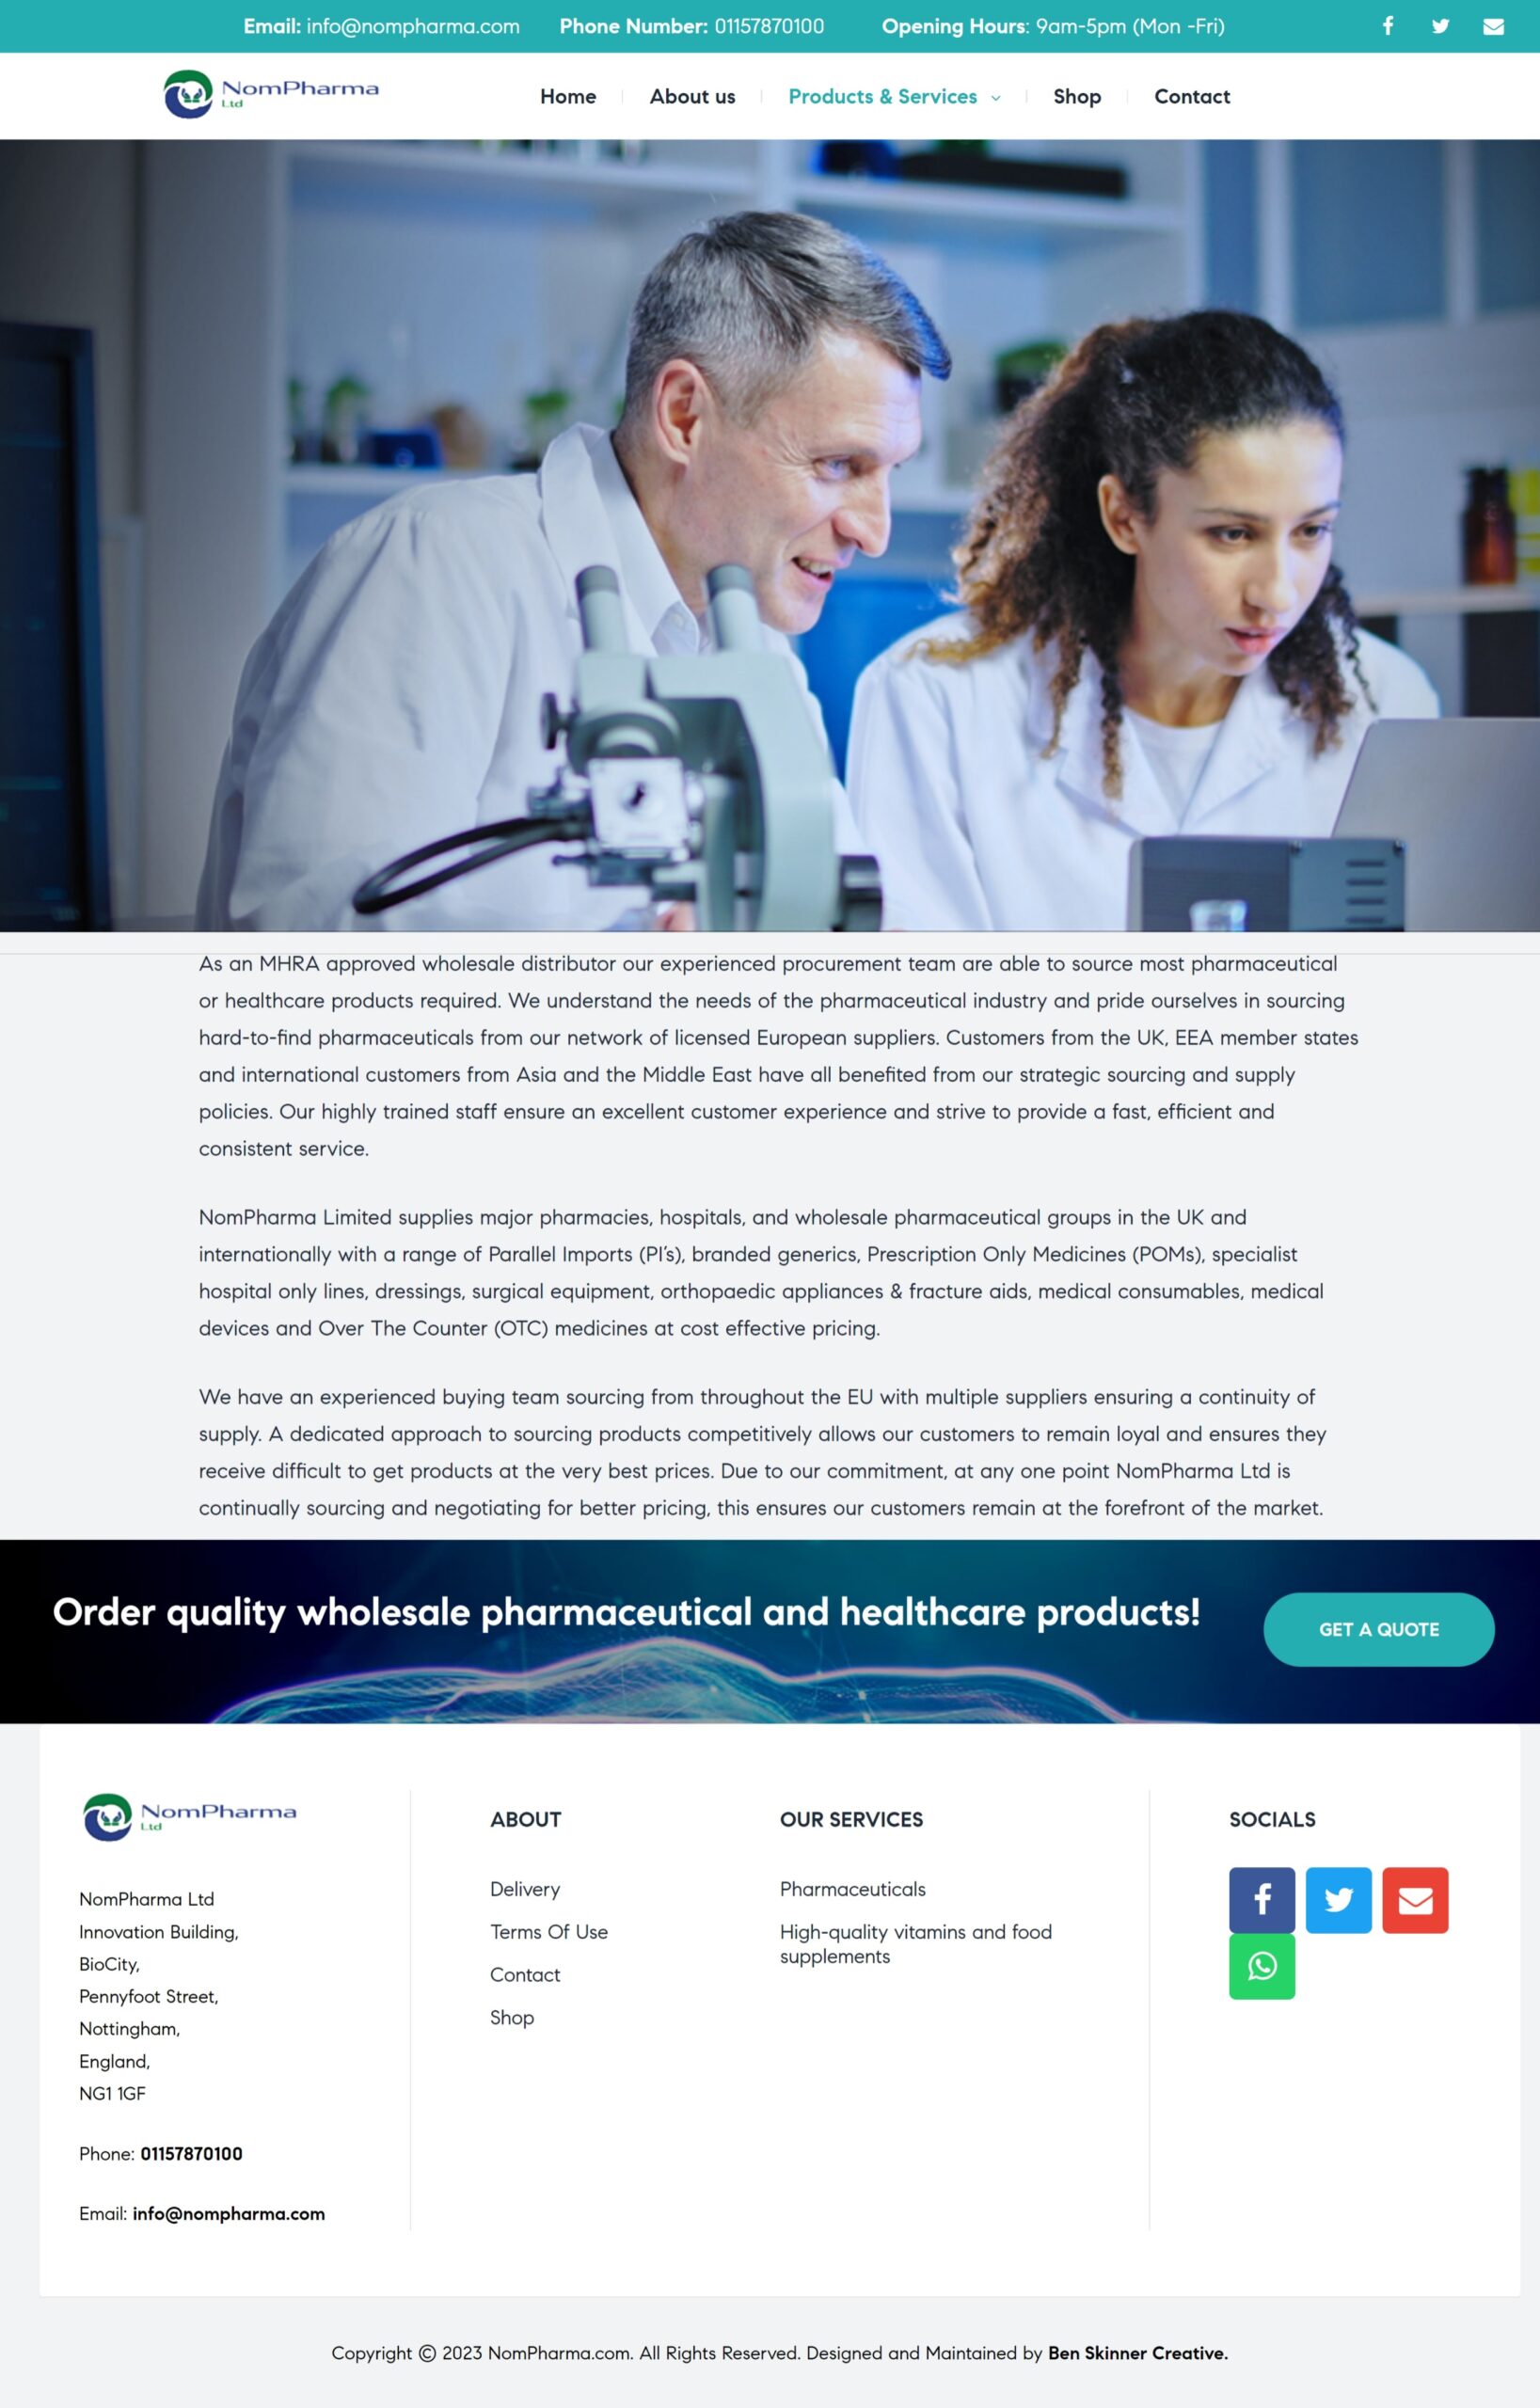 NomPharma Pharmaceutical Website Wholesale Operations Refresh - Online Visibility and Sales Growth